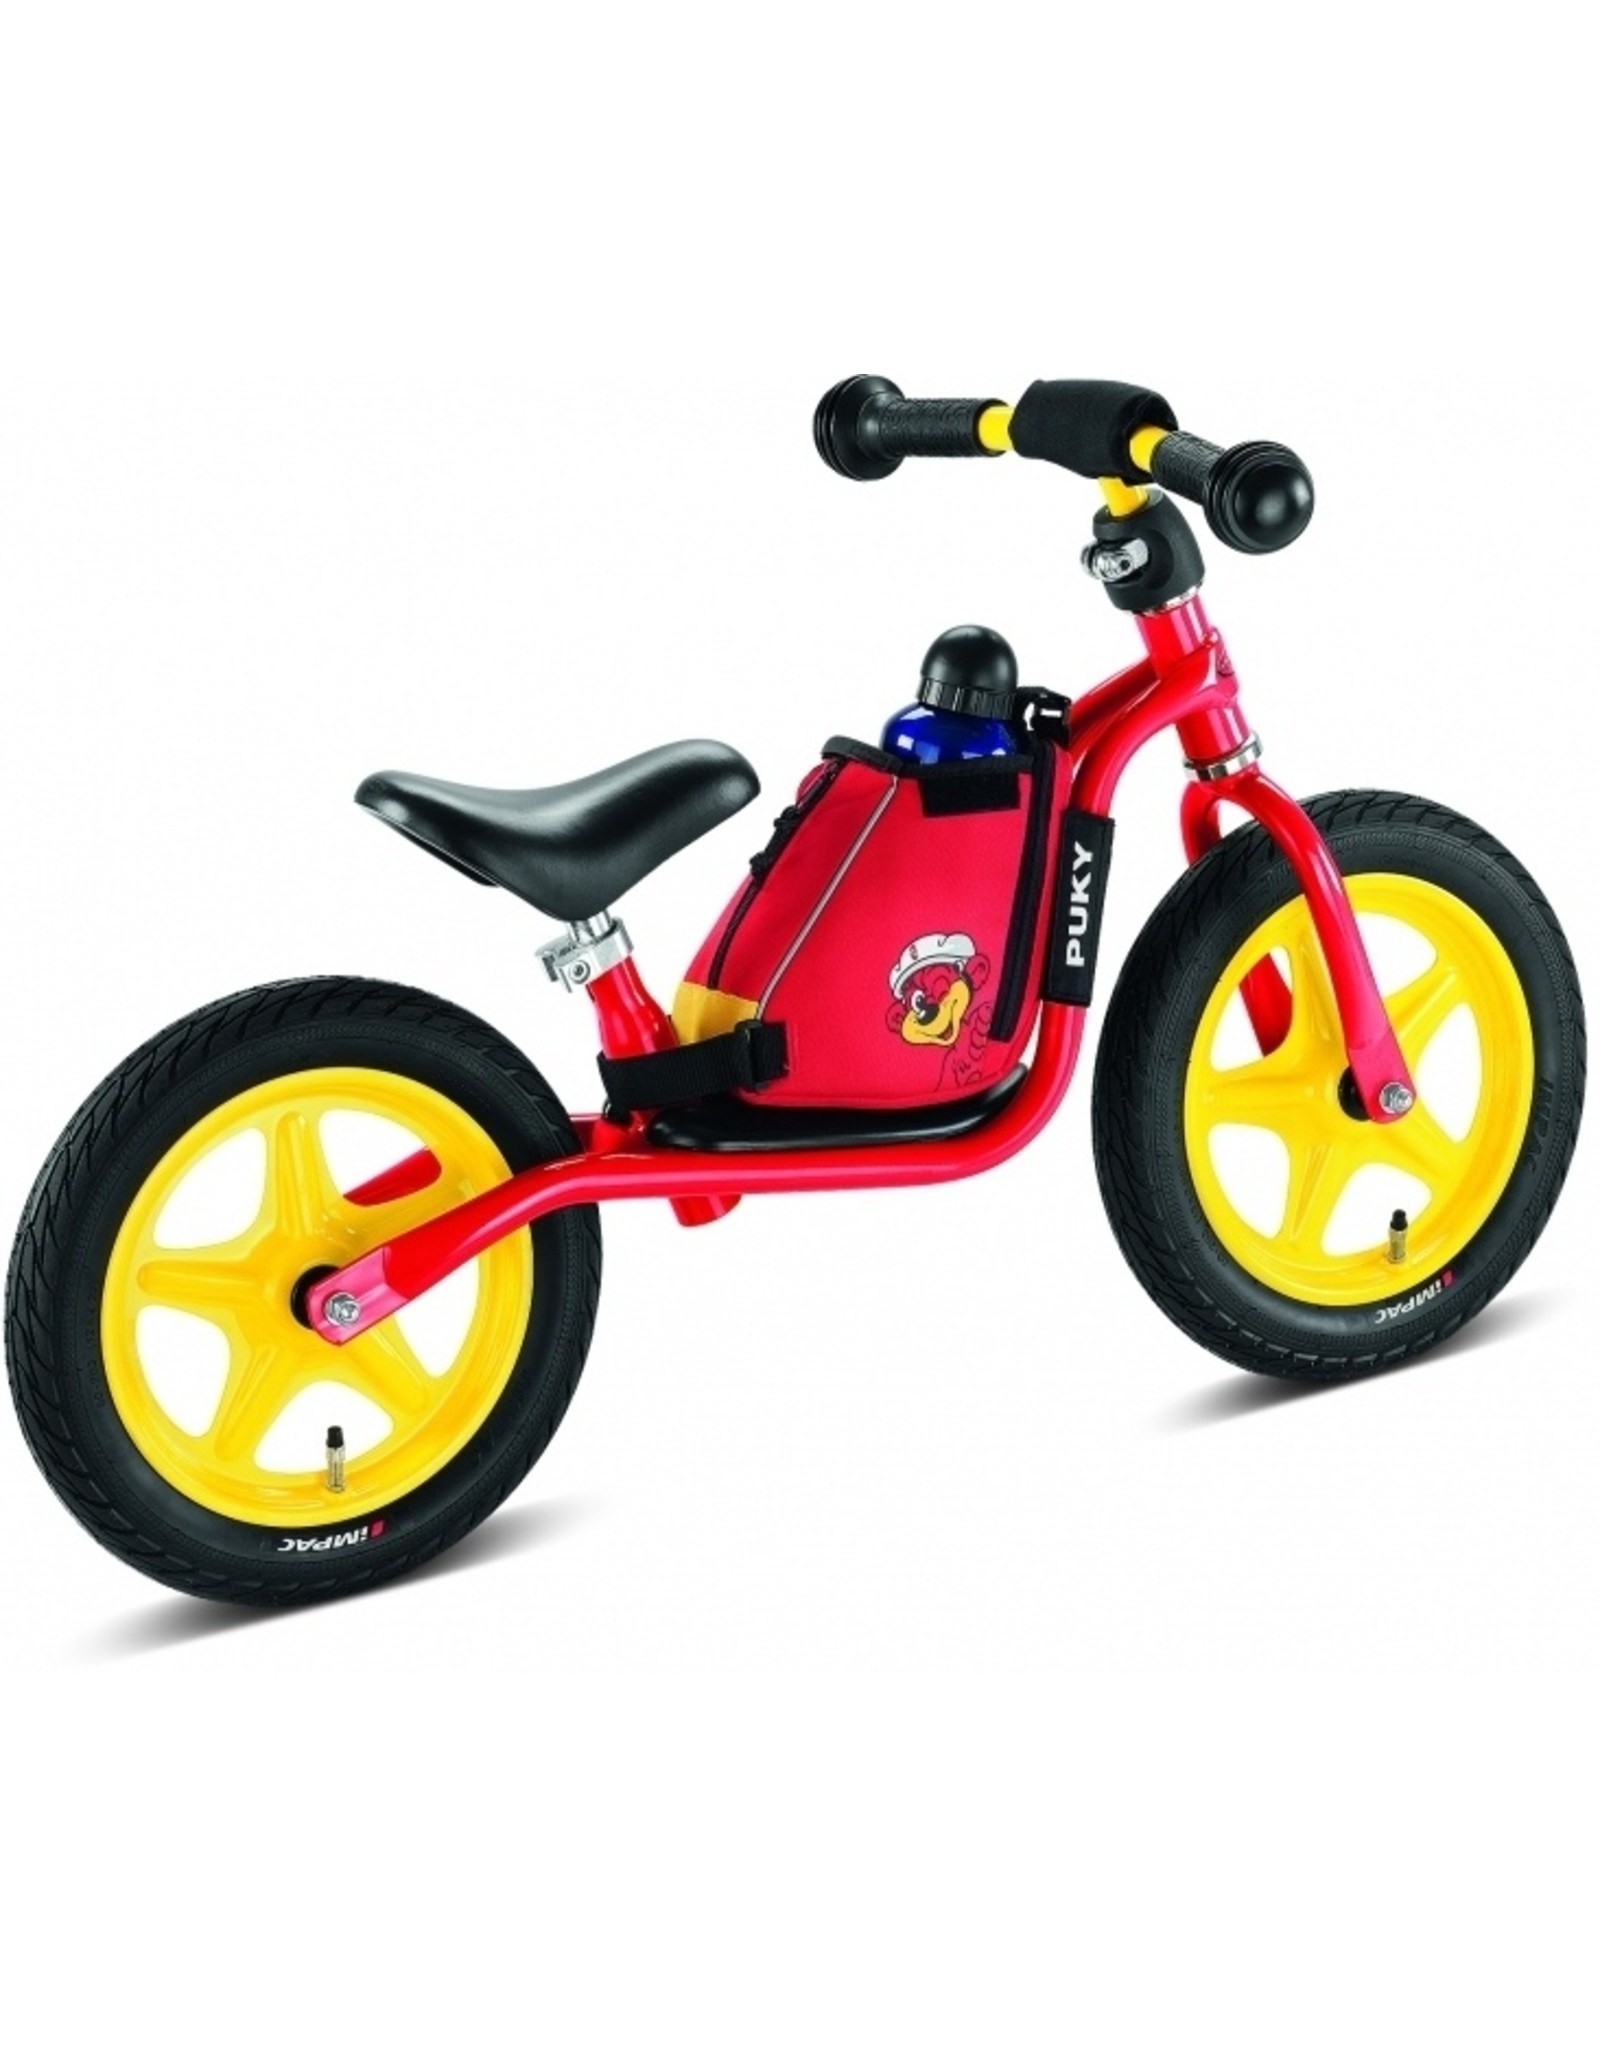 Puky Puky Learner bike bag red - Altoys - toys and more